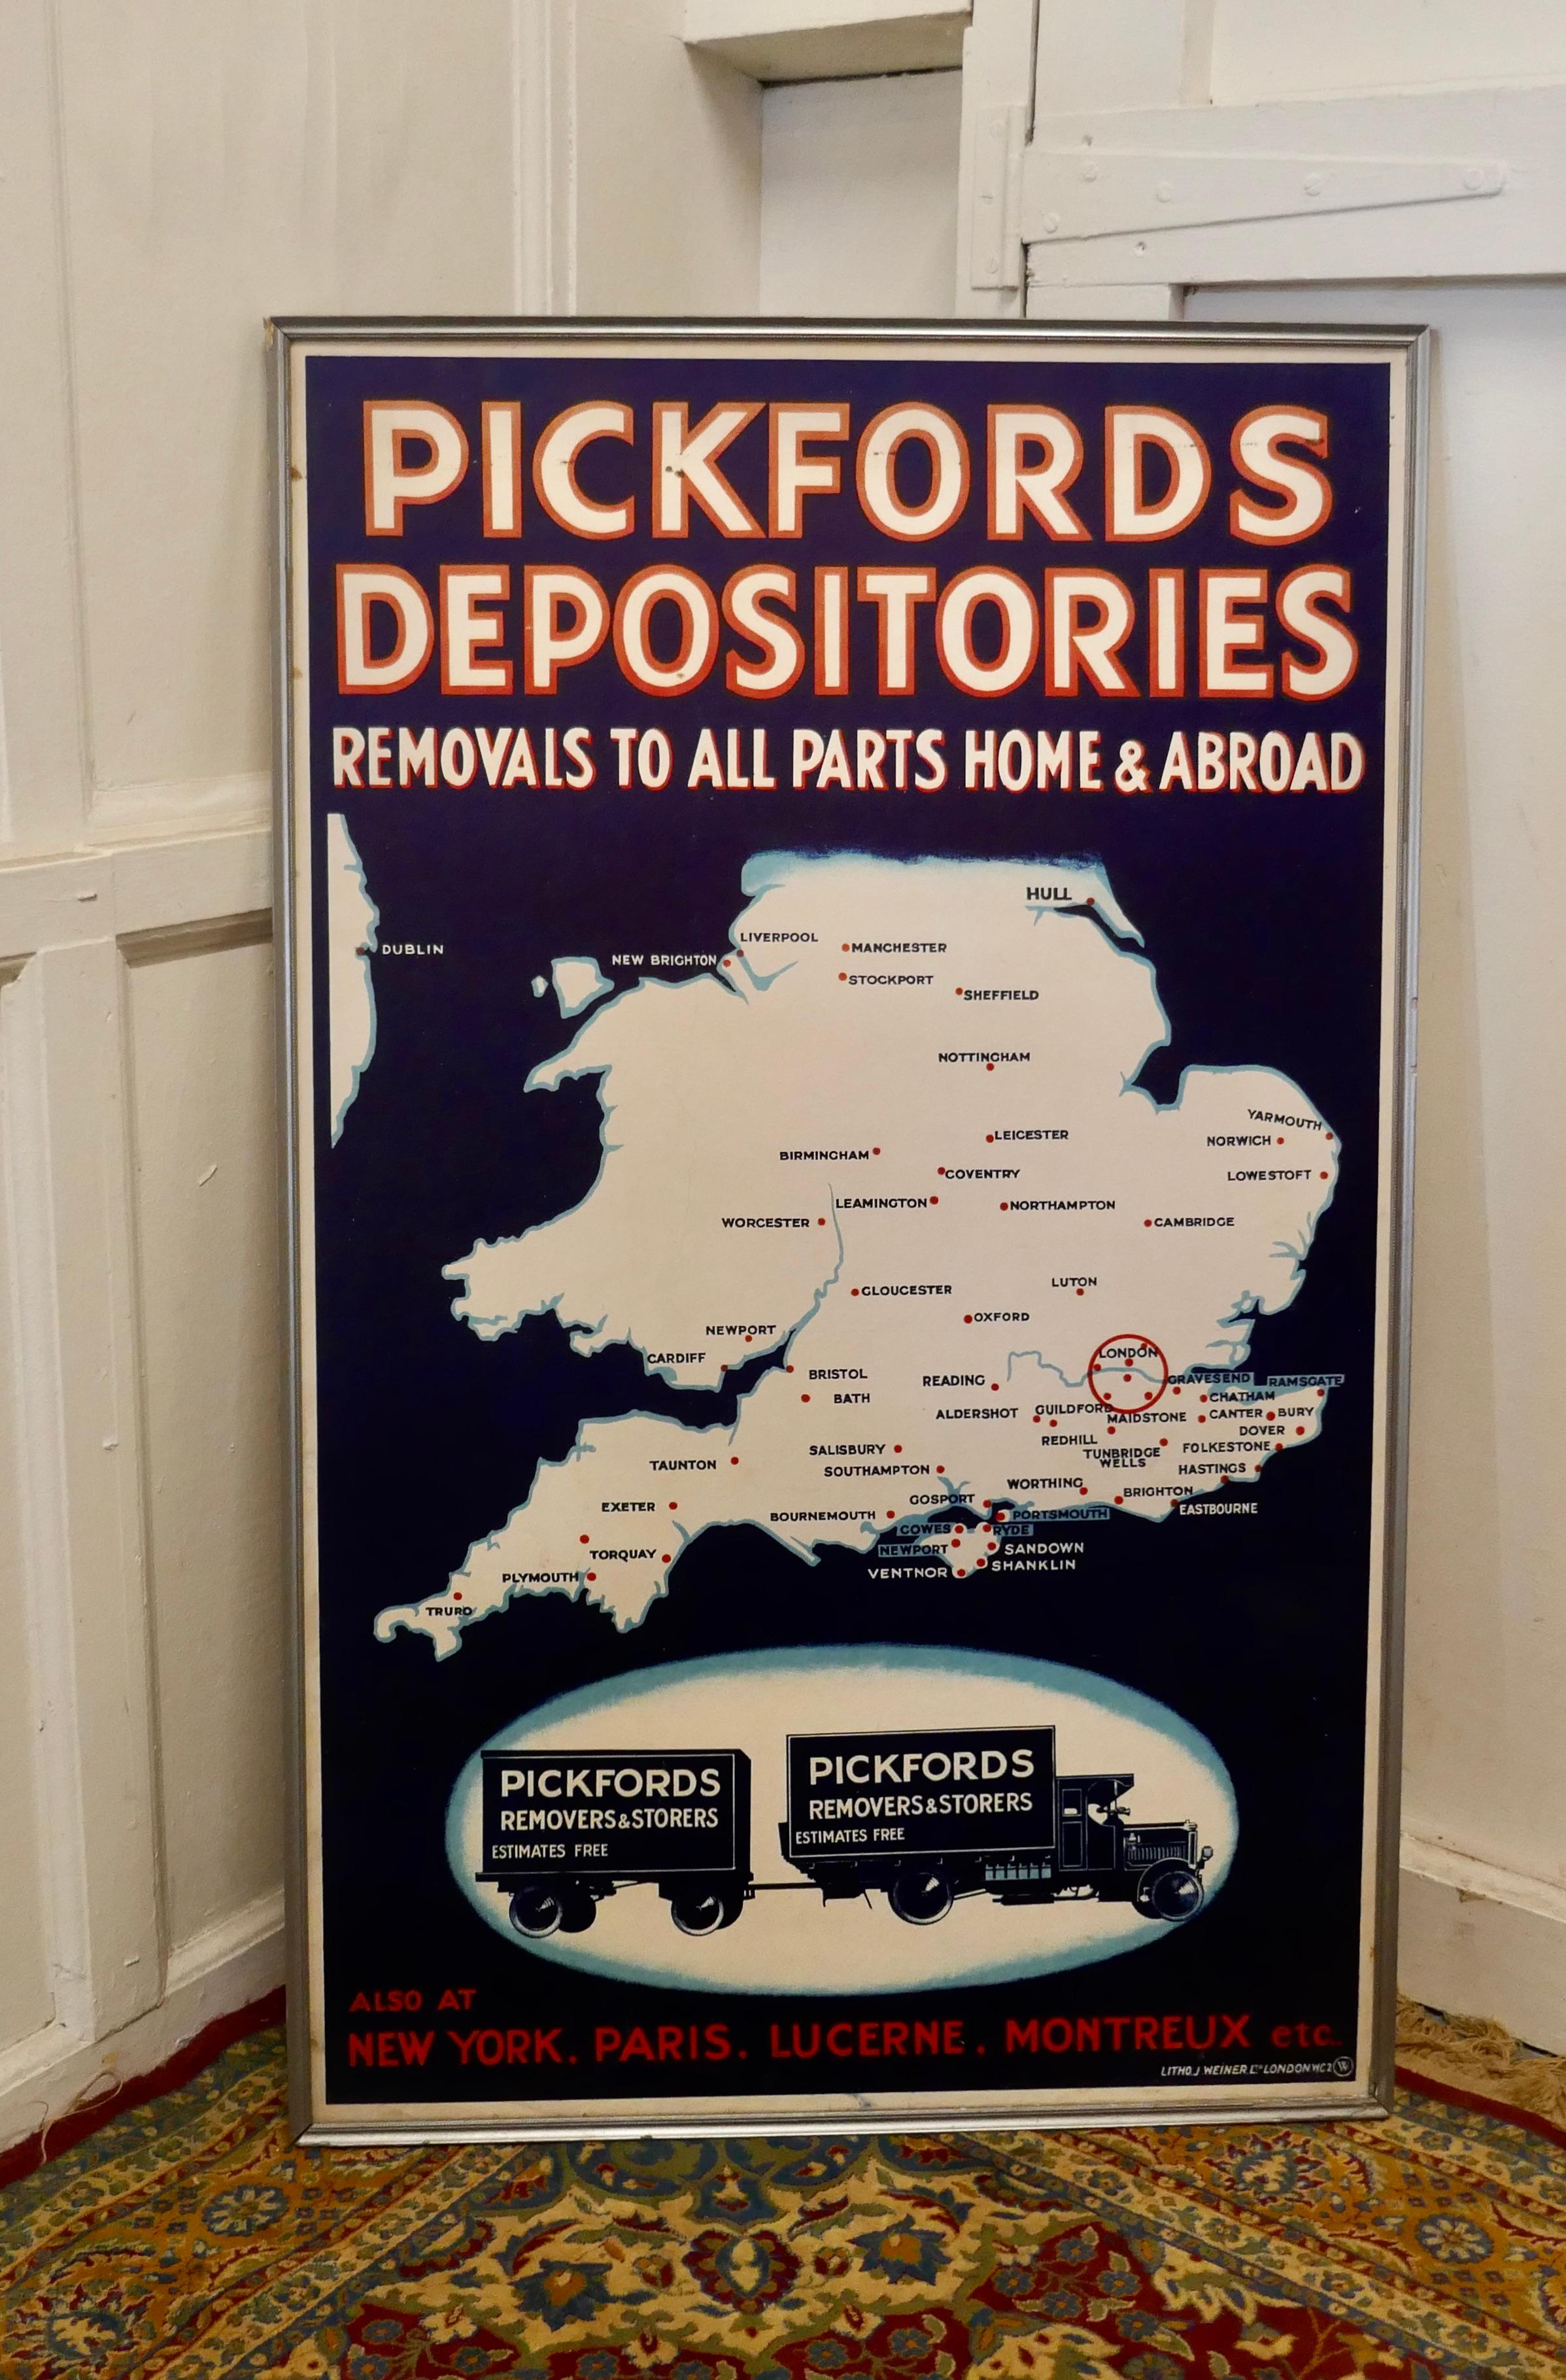 Original Card Map Poster, Pickfords Depositories

This is a good original advertising sign, showing the locations of Pickfords Depositories
The Sign is Colour printed on card, in a light frame
Measures: The Frame is 26” wide and 41” high
TAC74.